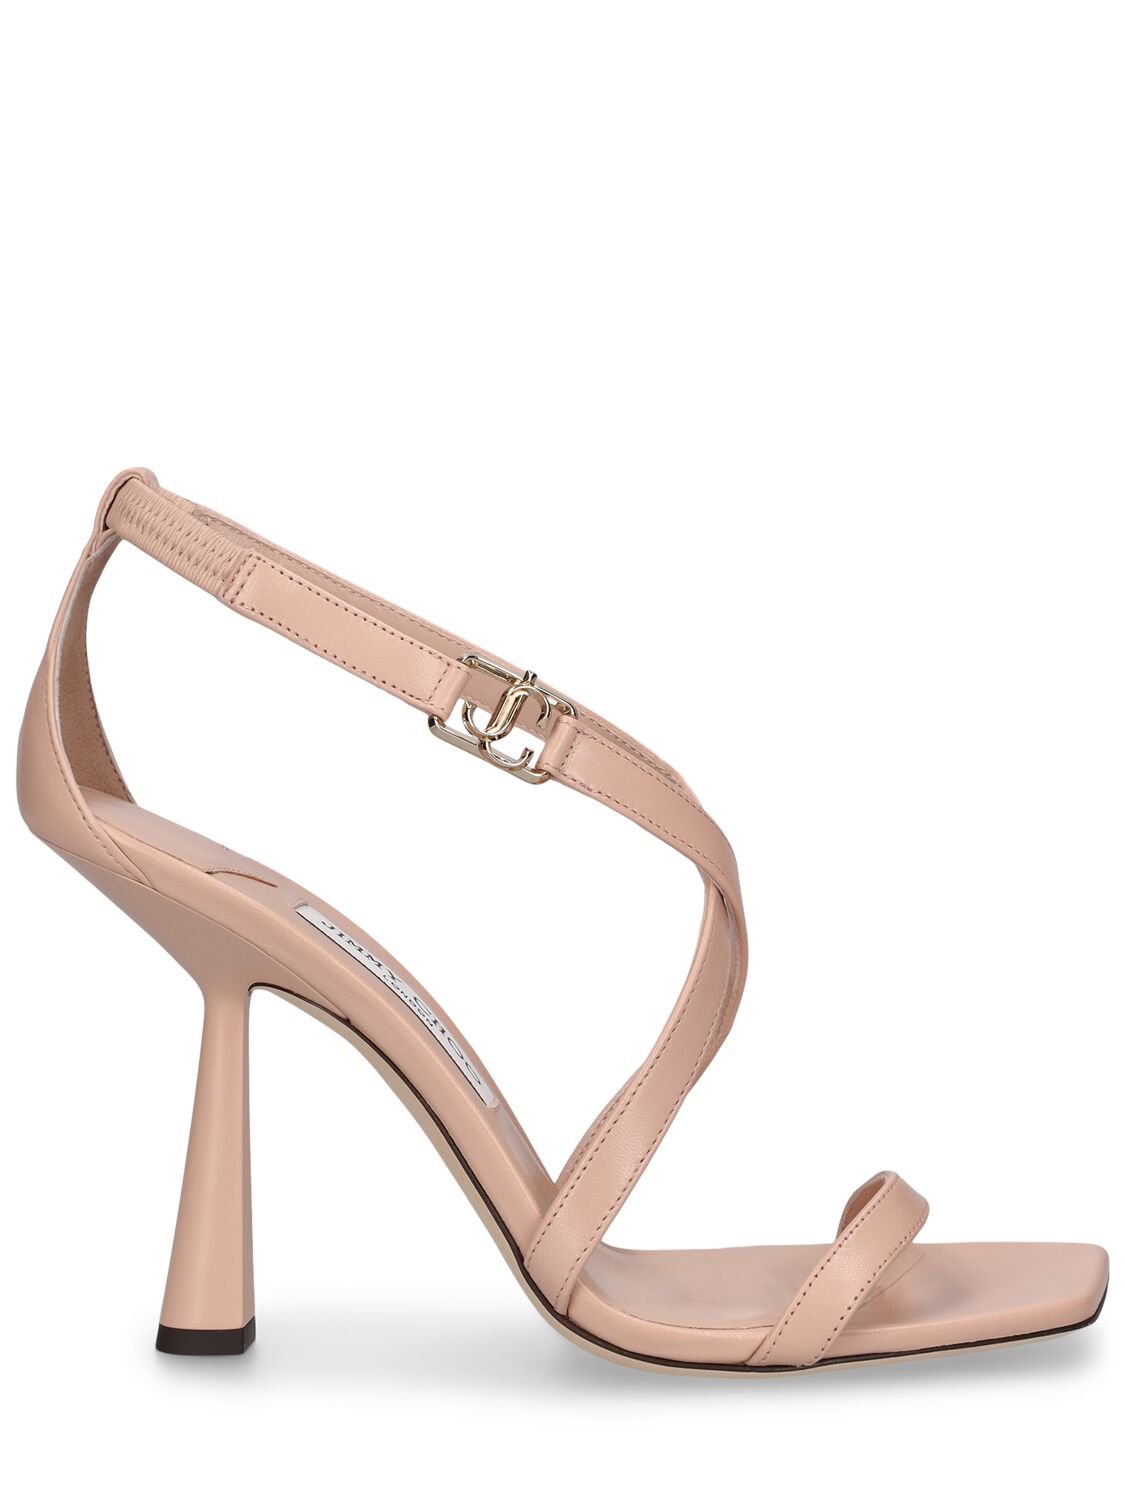 Jimmy Choo 100mm Jessica Leather Sandals In Nude